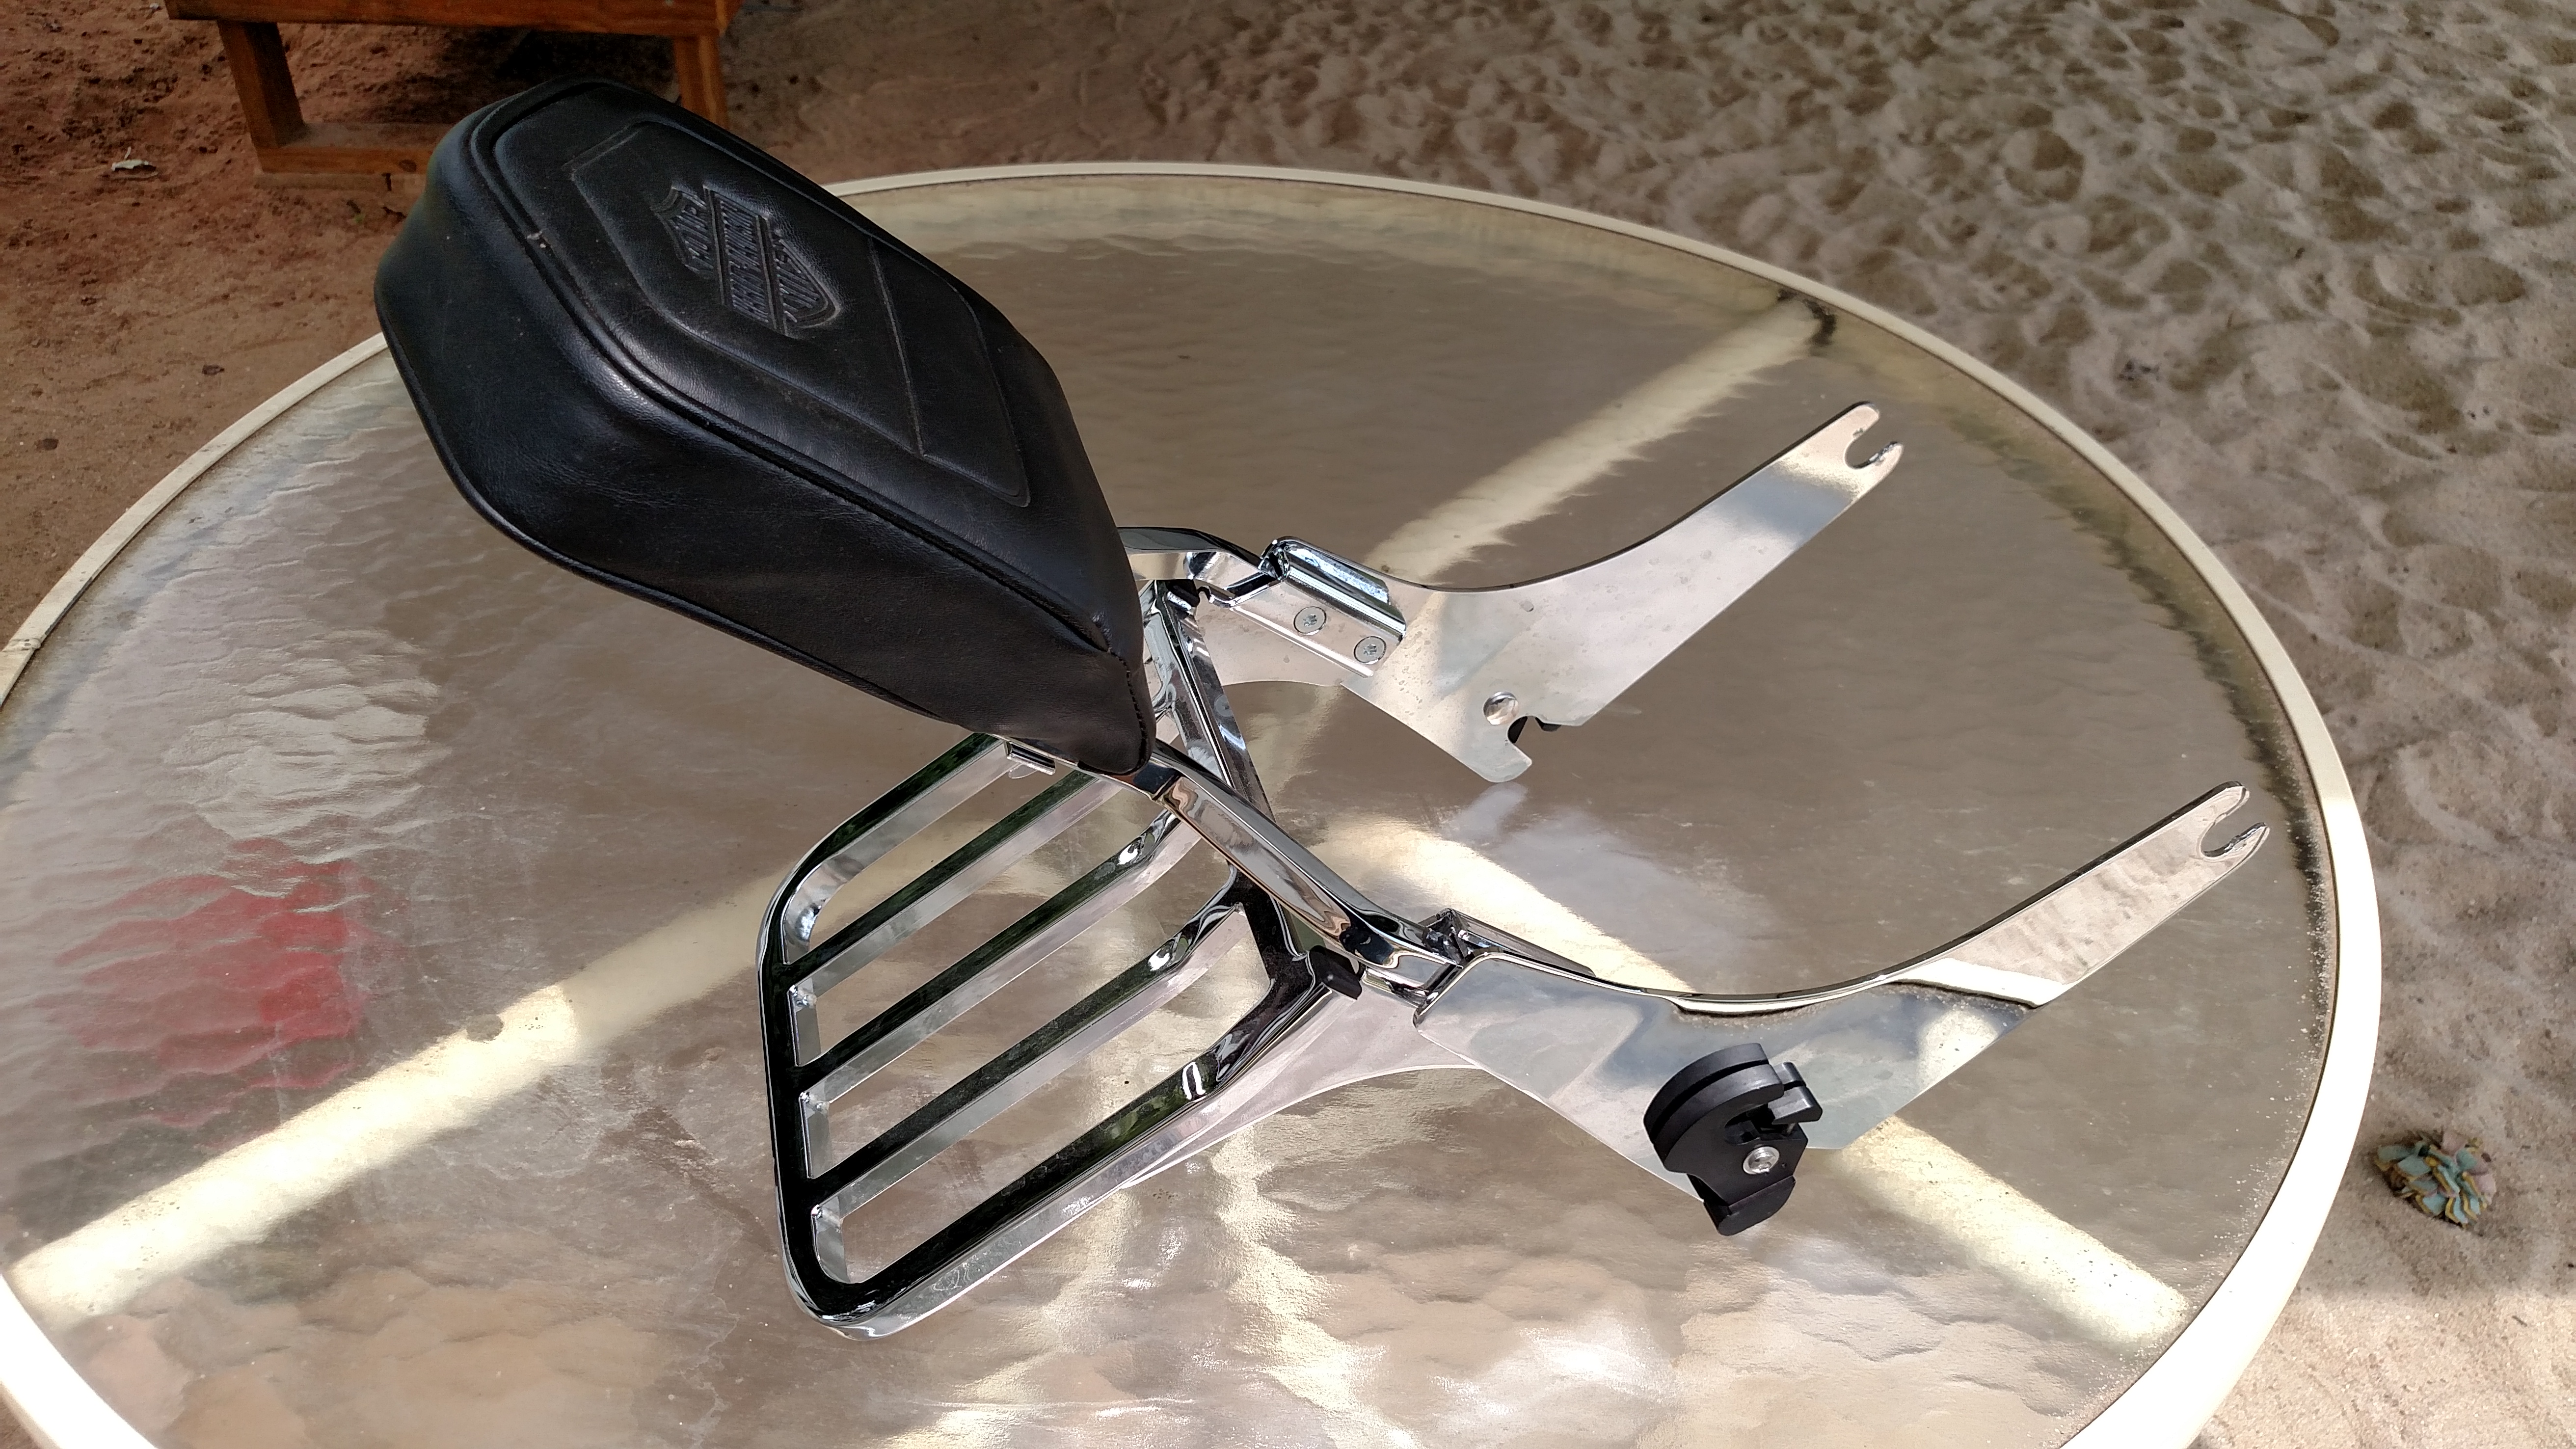 2012 Switchback Removable Sissy bar with luggage rack - Harley Davidson Forums5248 x 2952